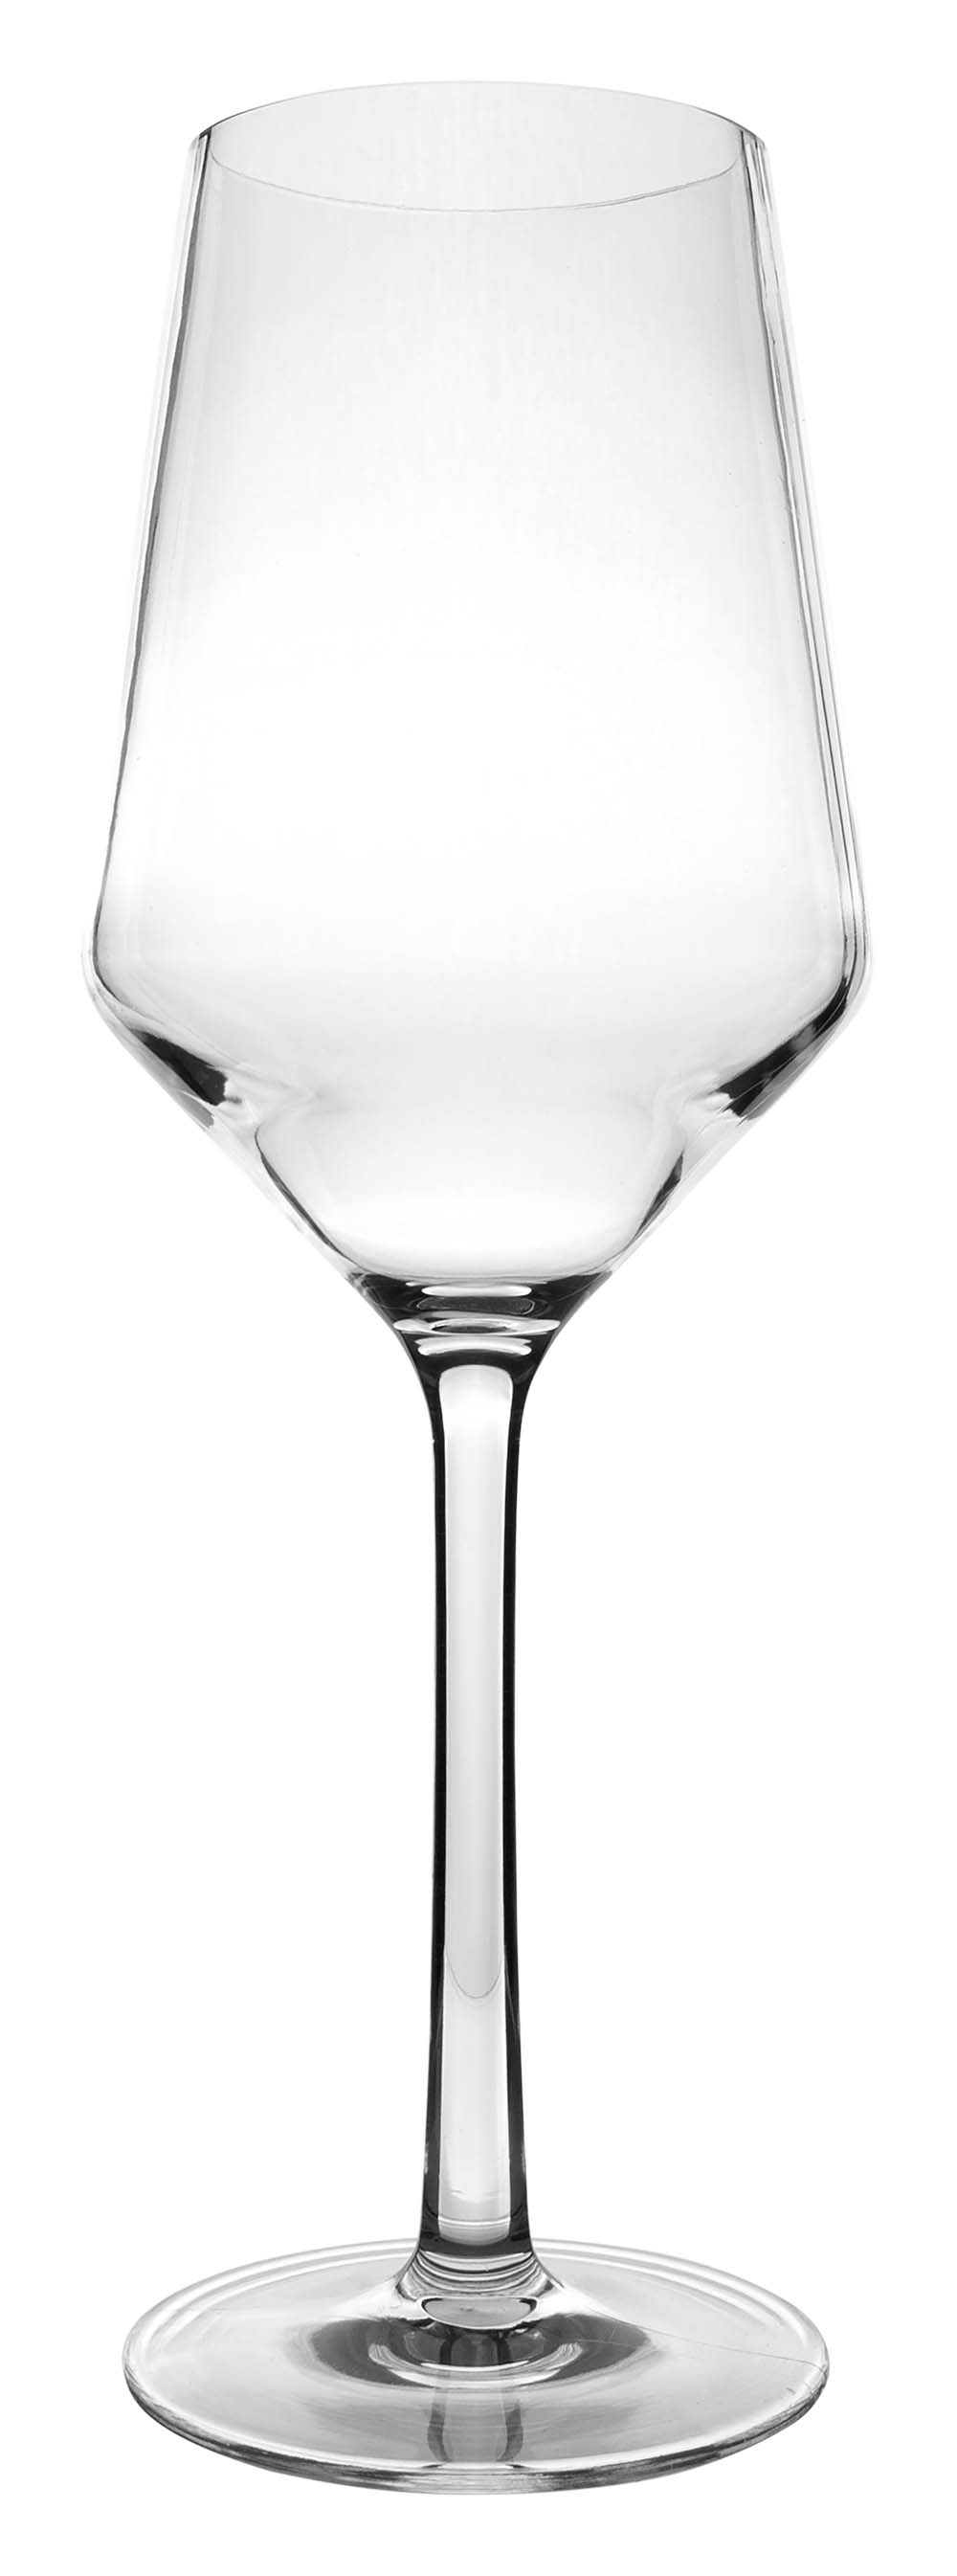 6101464 An almost unbreakable luxury white wine glass with a round and stylish design. Dishwasher safe, lightweight and even better scratch resistant. Made of strong tritan. A set of 2 glasses. The glasses are BPA free.